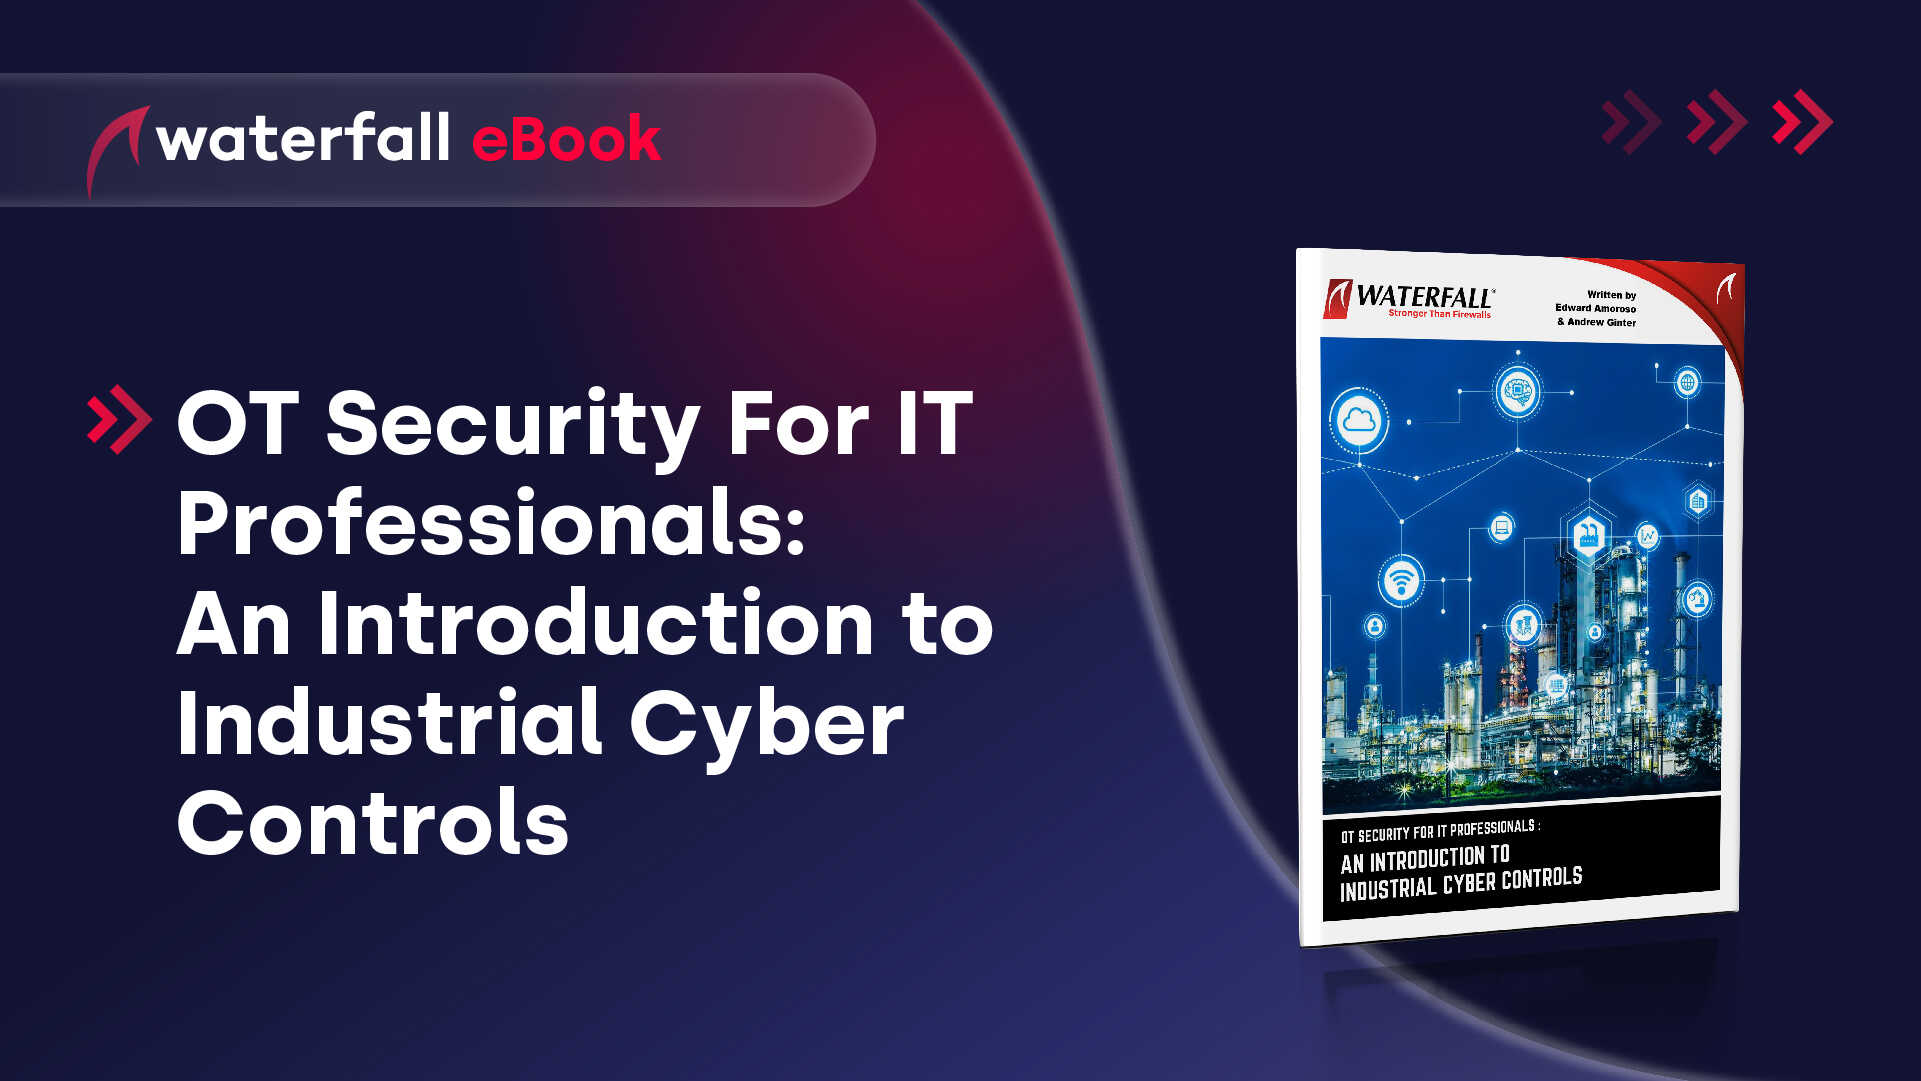 OT Security For IT Professionals eBook - An Introduction to Industrial Cyber Controls